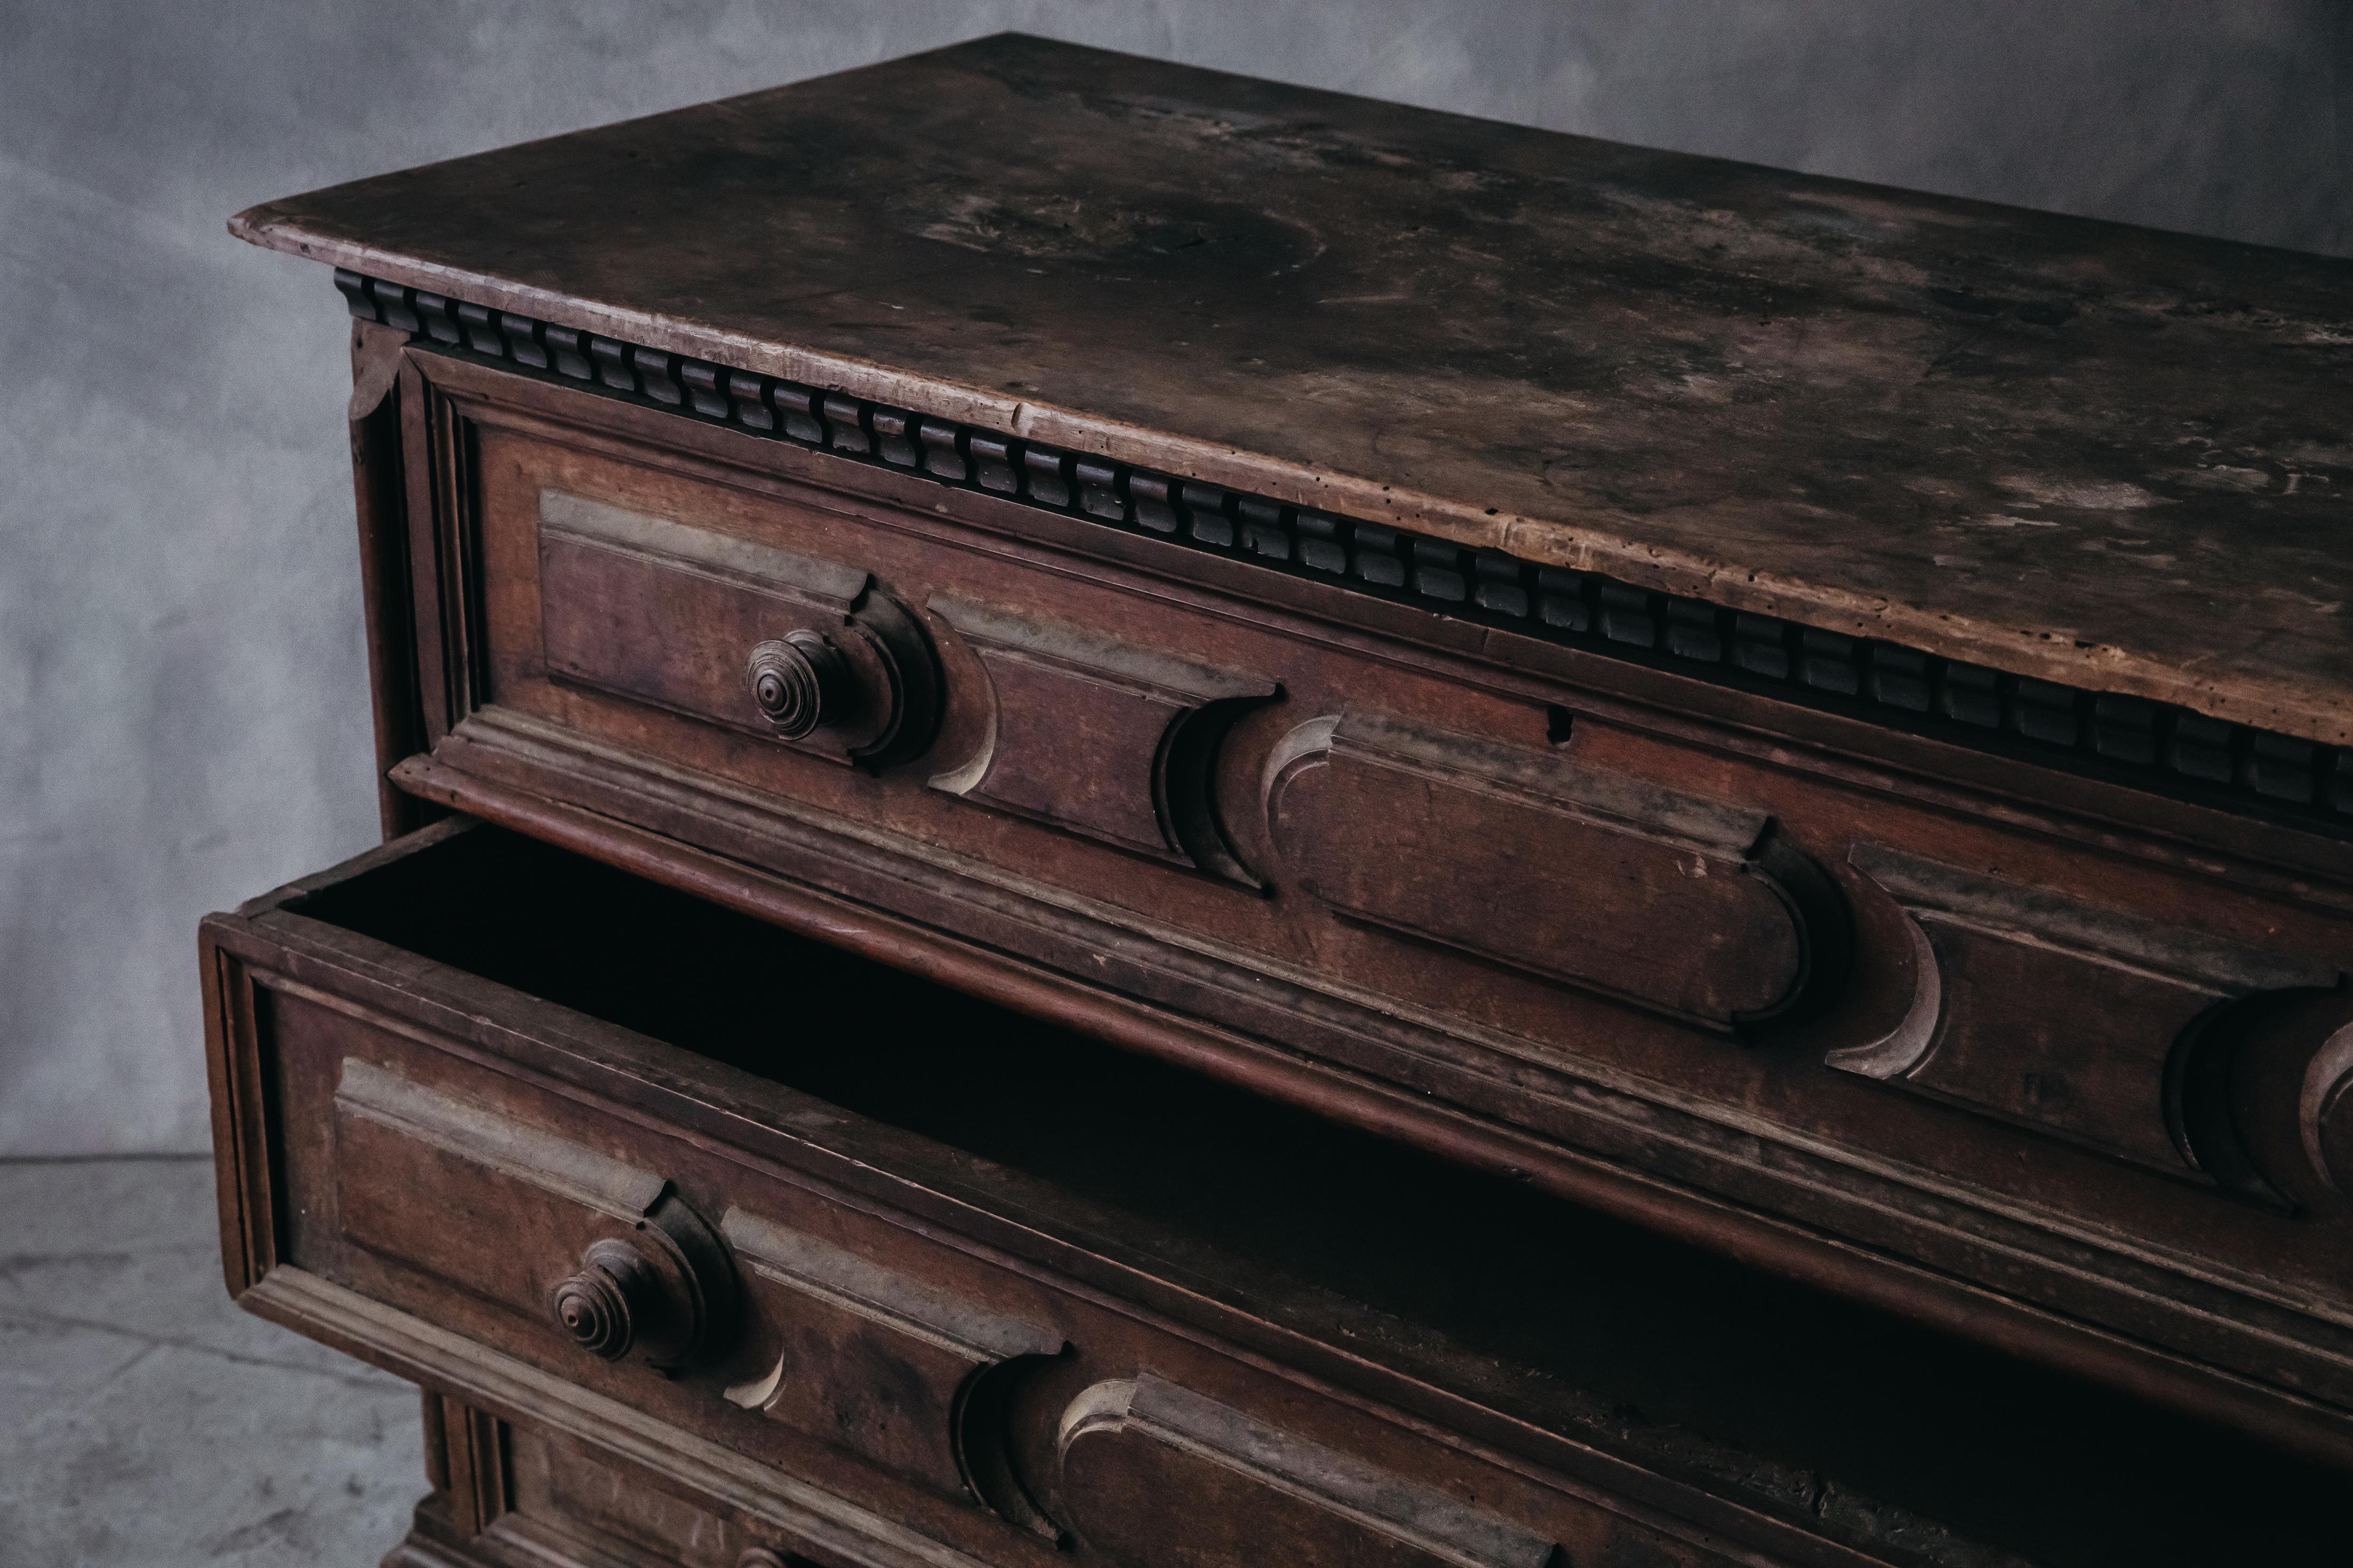 European Early Walnut Chest of Drawers from Italy, circa 1800